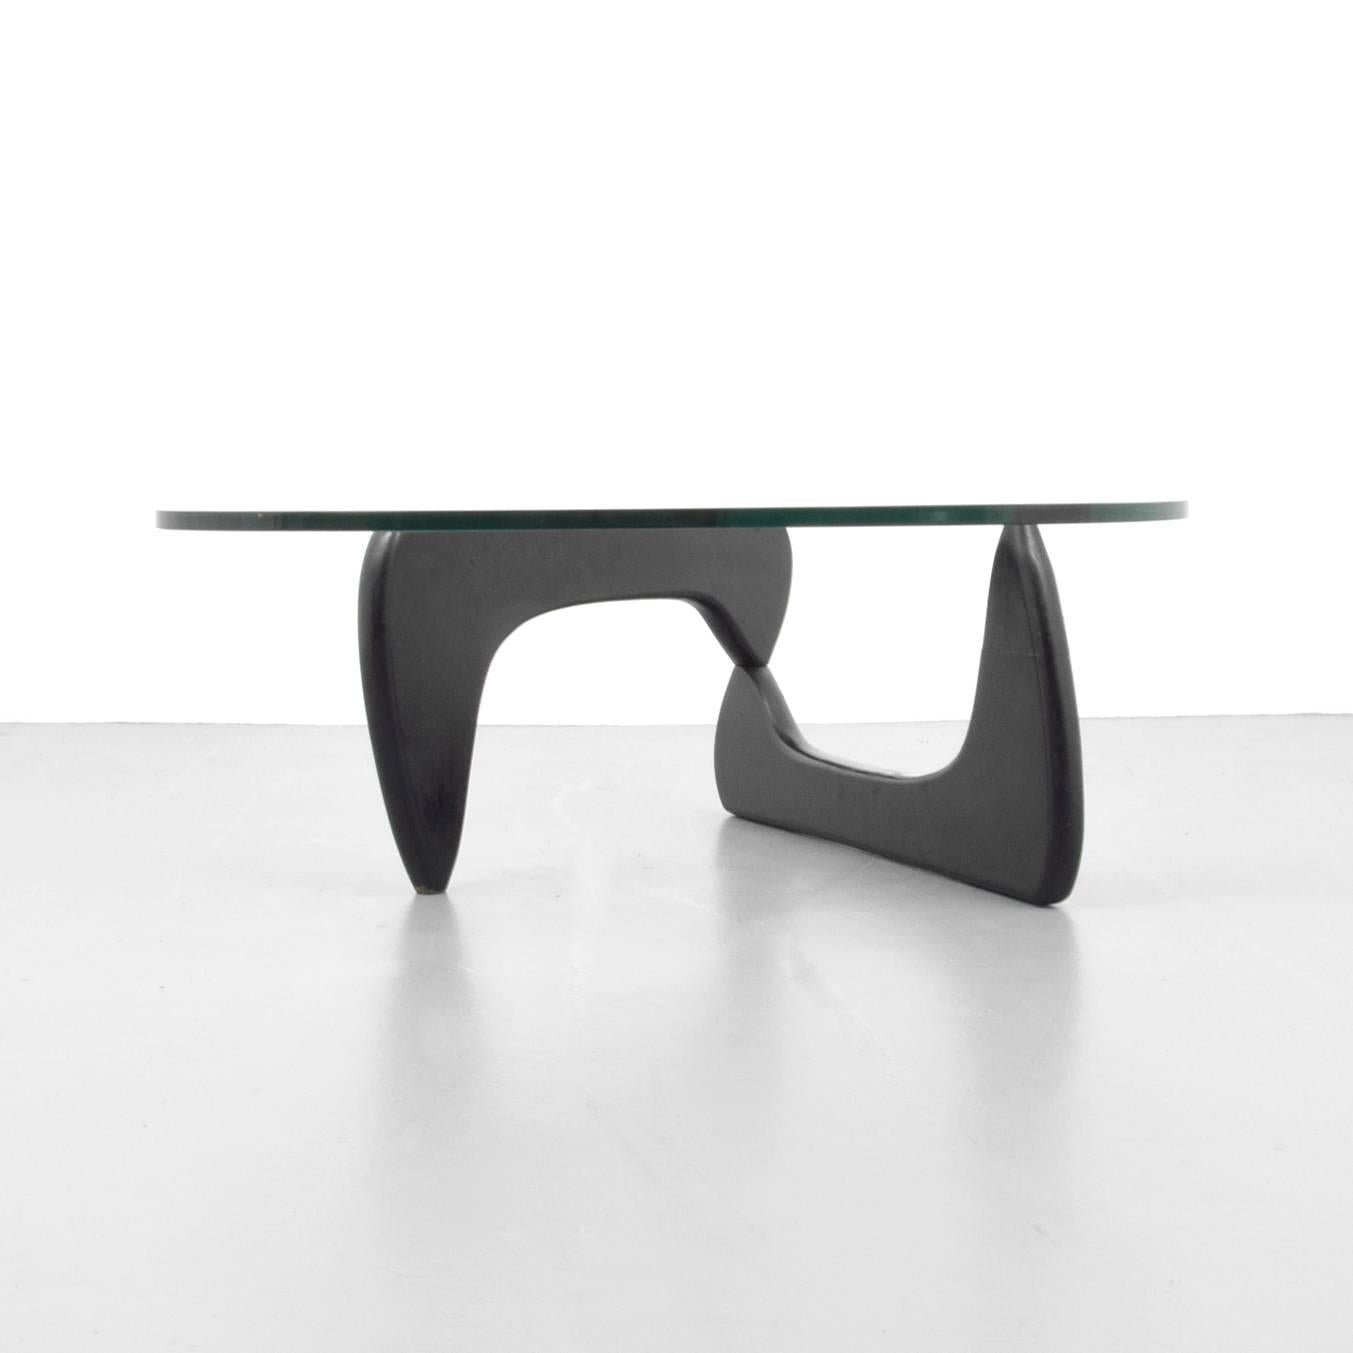 American Early Edition Isamu Noguchi Table in 1950 Table by Herman Miller, 1949